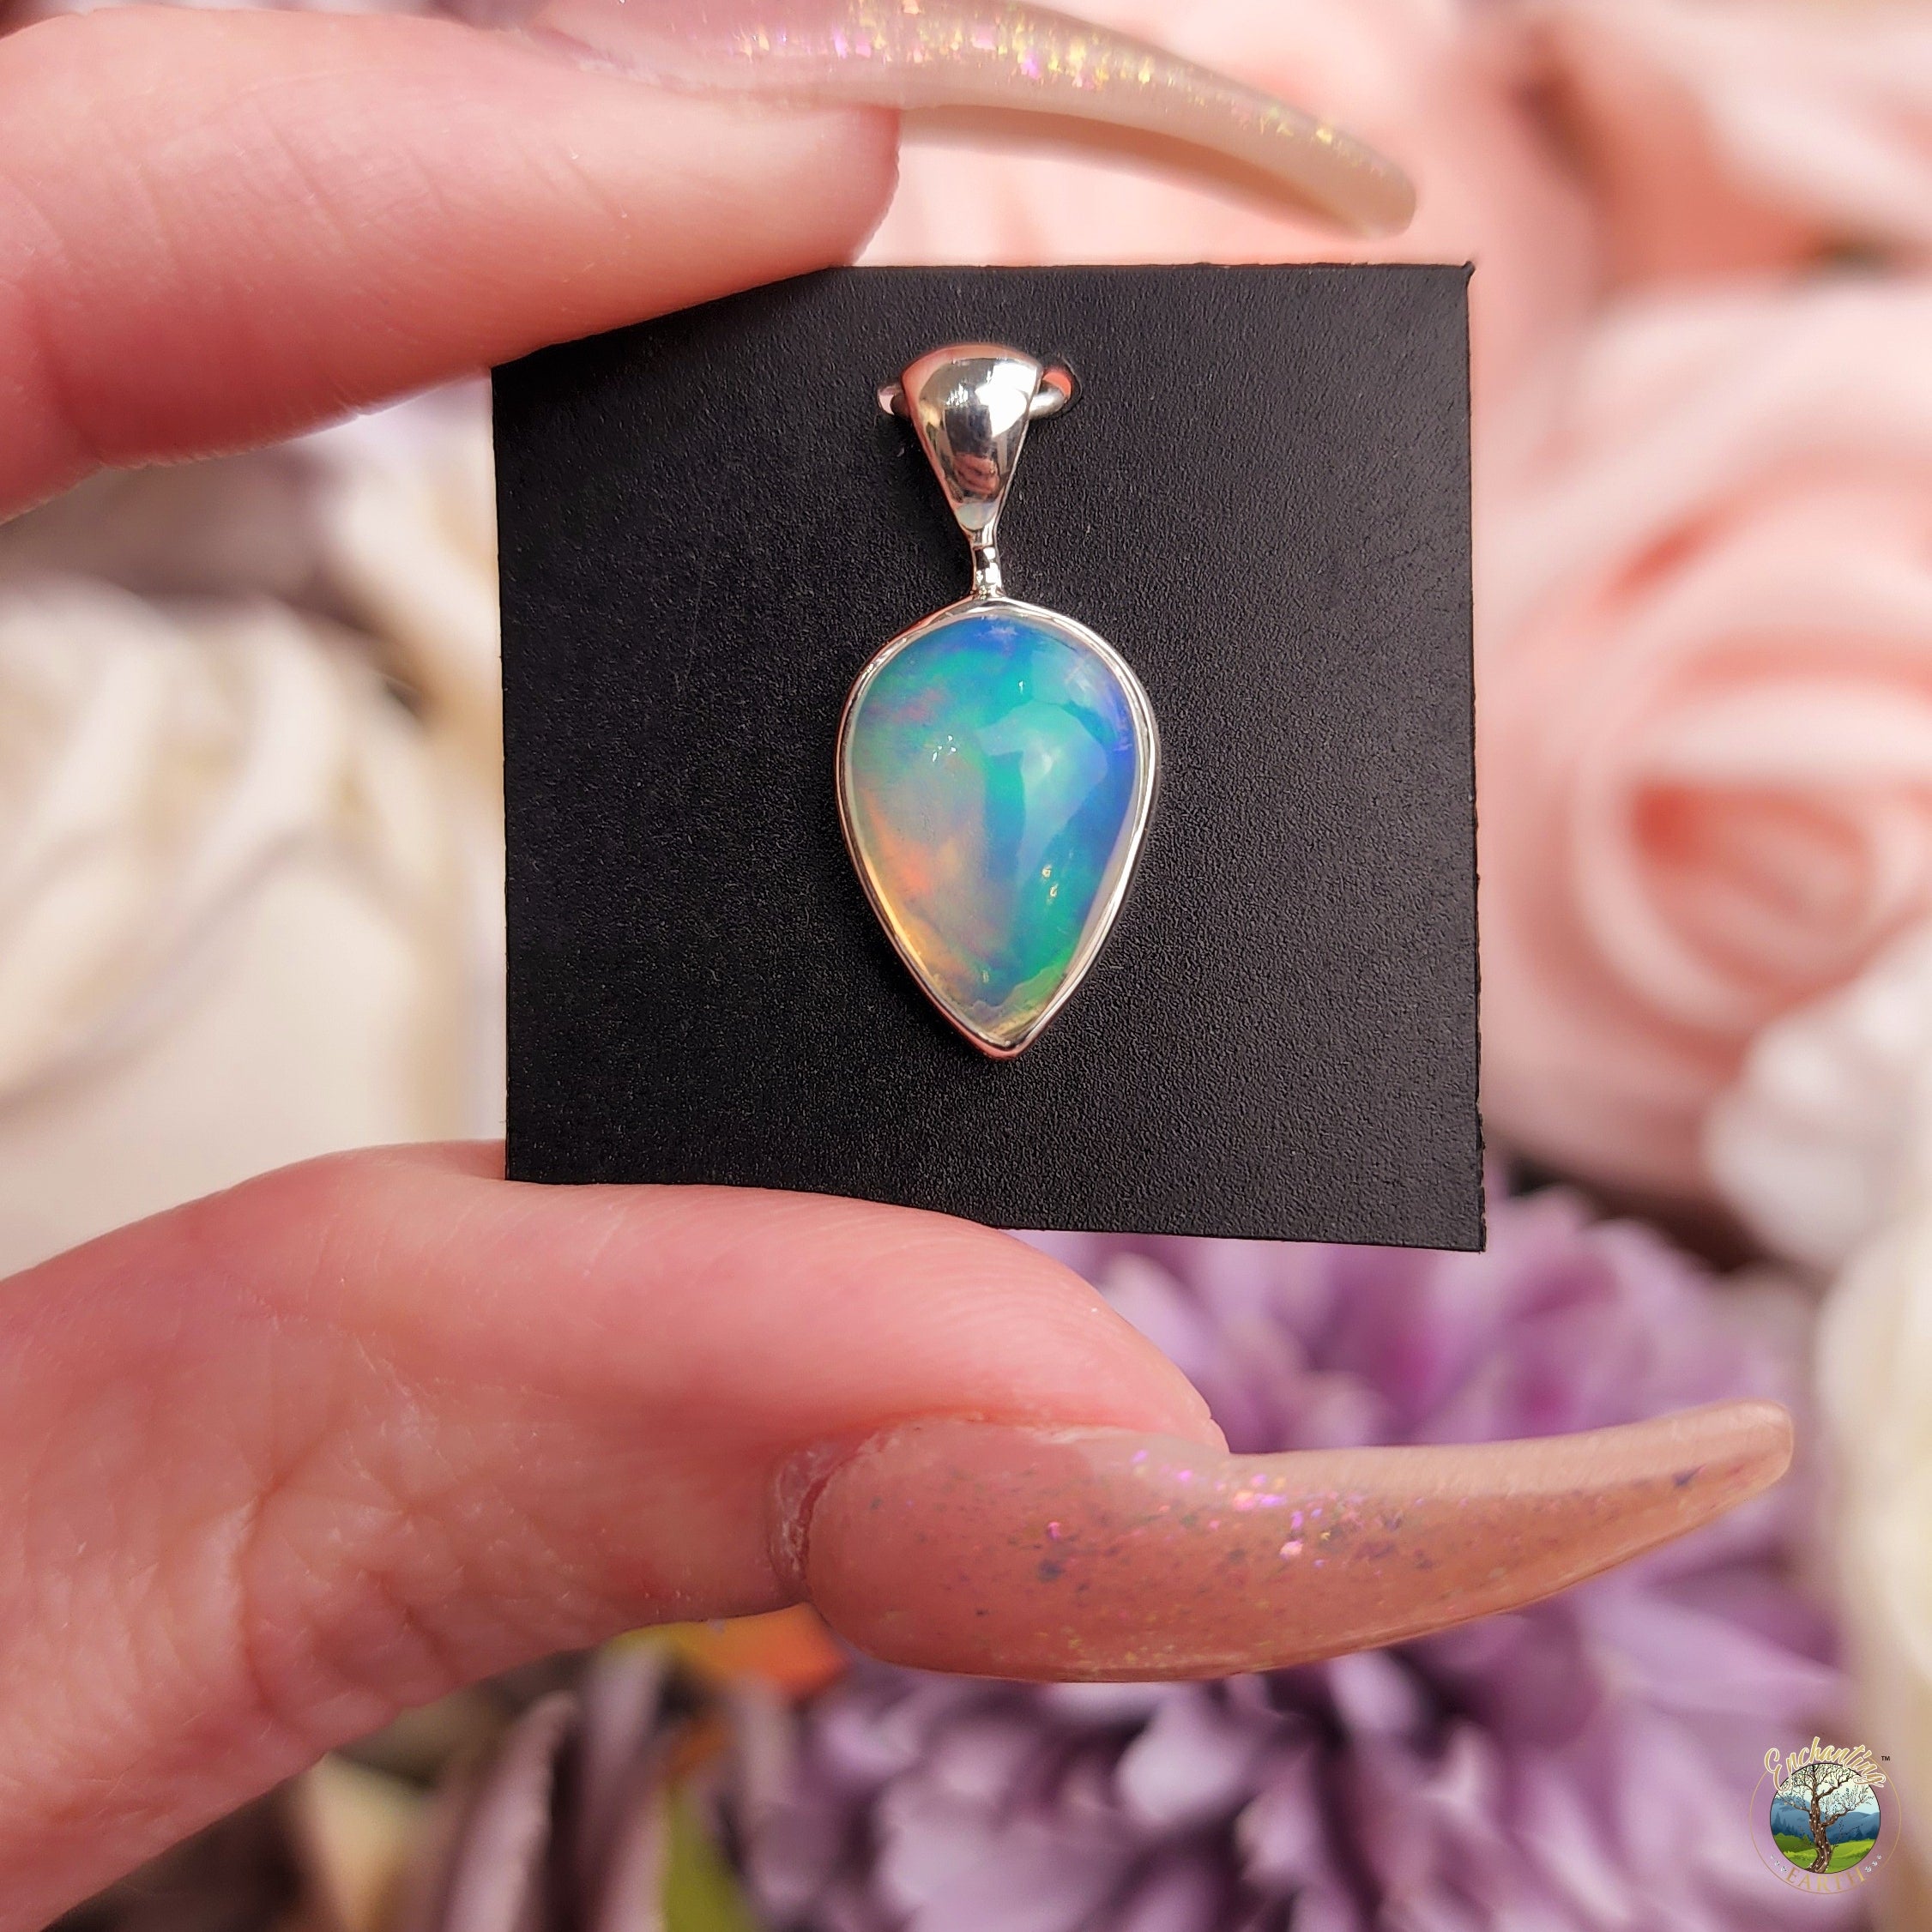 Ethiopian Opal .925 Silver Pendant (111B) for Creativity, Joy and Self Discovery